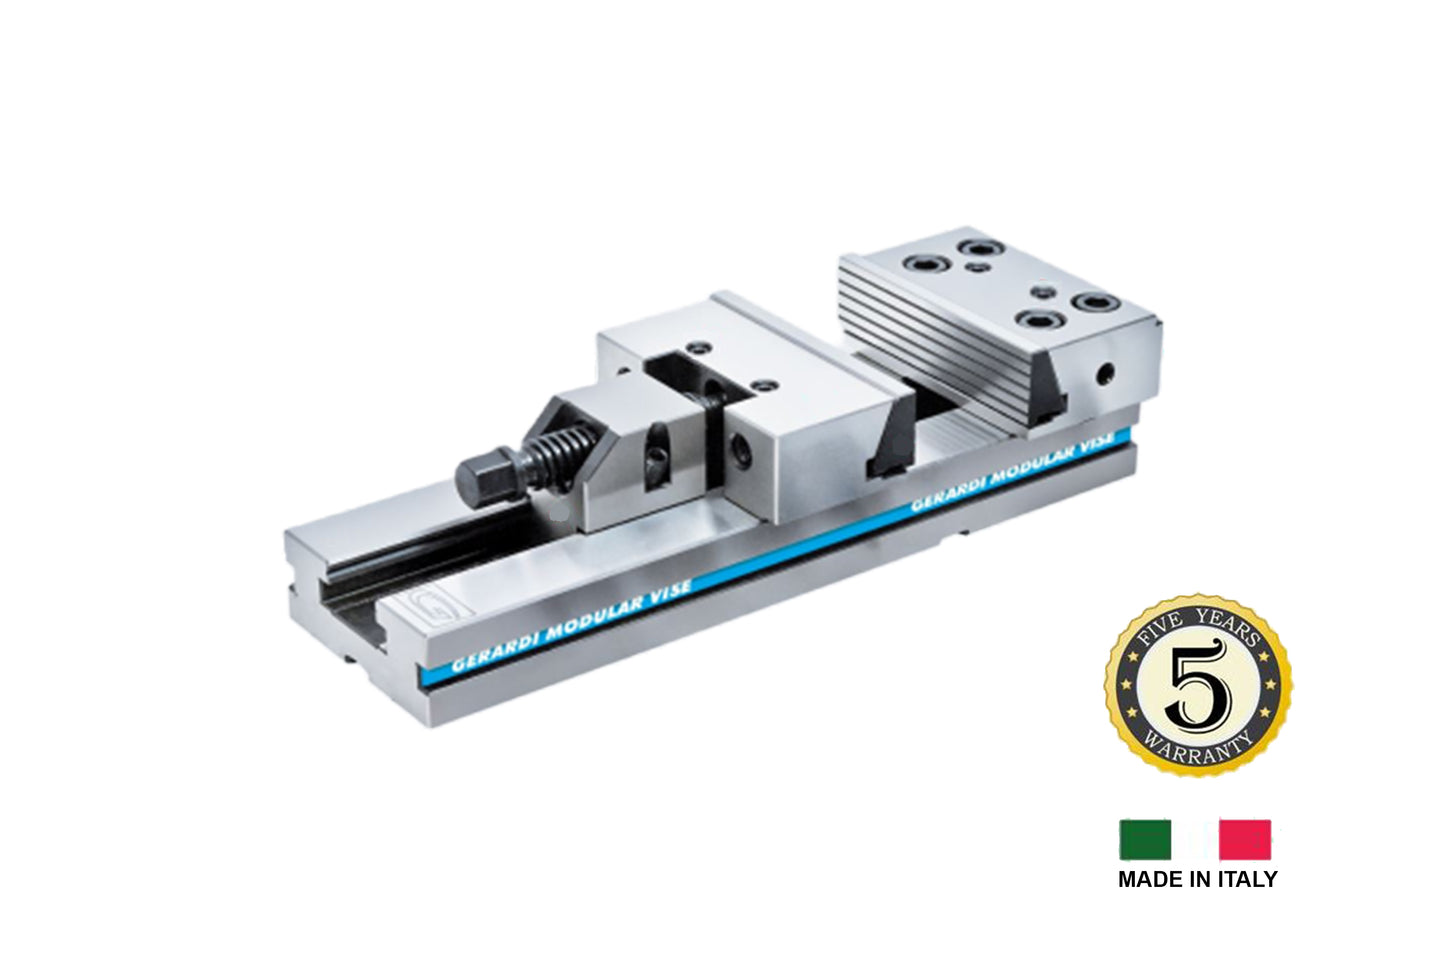 Gerardi Standard Precision Modular Vice with Solid Guided Movable Jaw (Width = 150mm, Opening = 300mm)